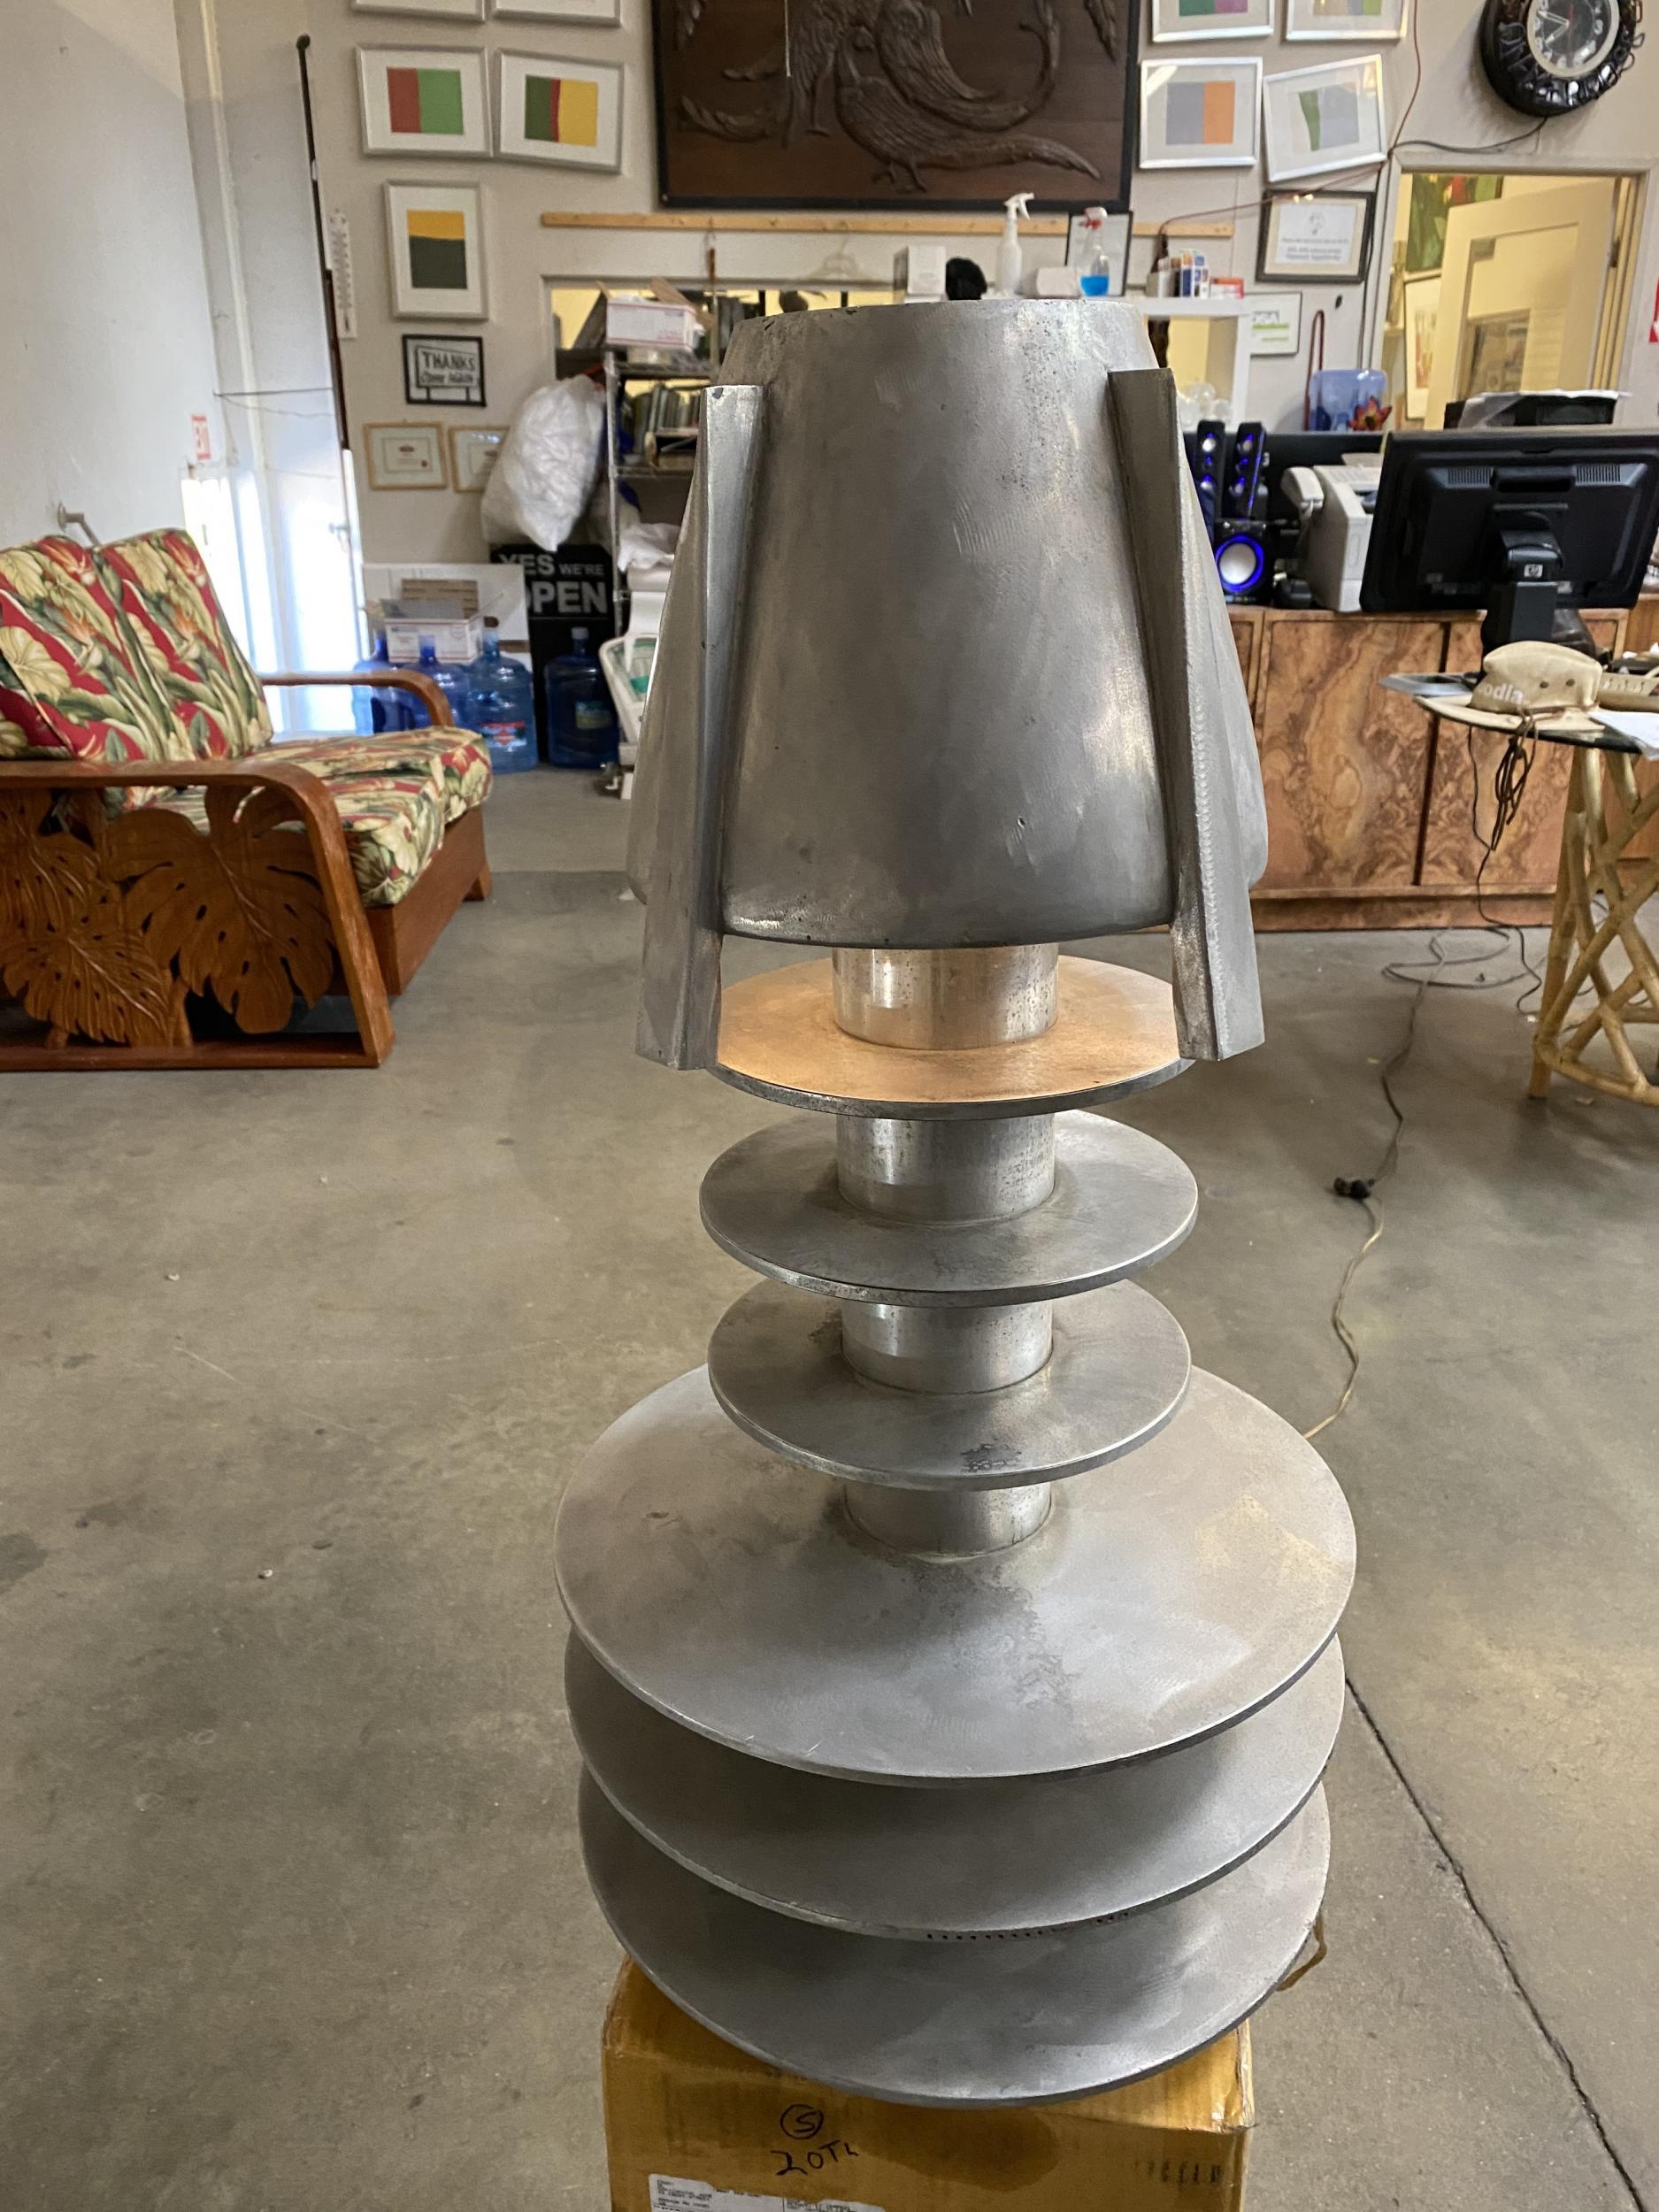 Custom made aircraft aluminum blinker lamp featuring a lamp made from jet engine turbine parts. The lamp blinks in one second inter-volts.